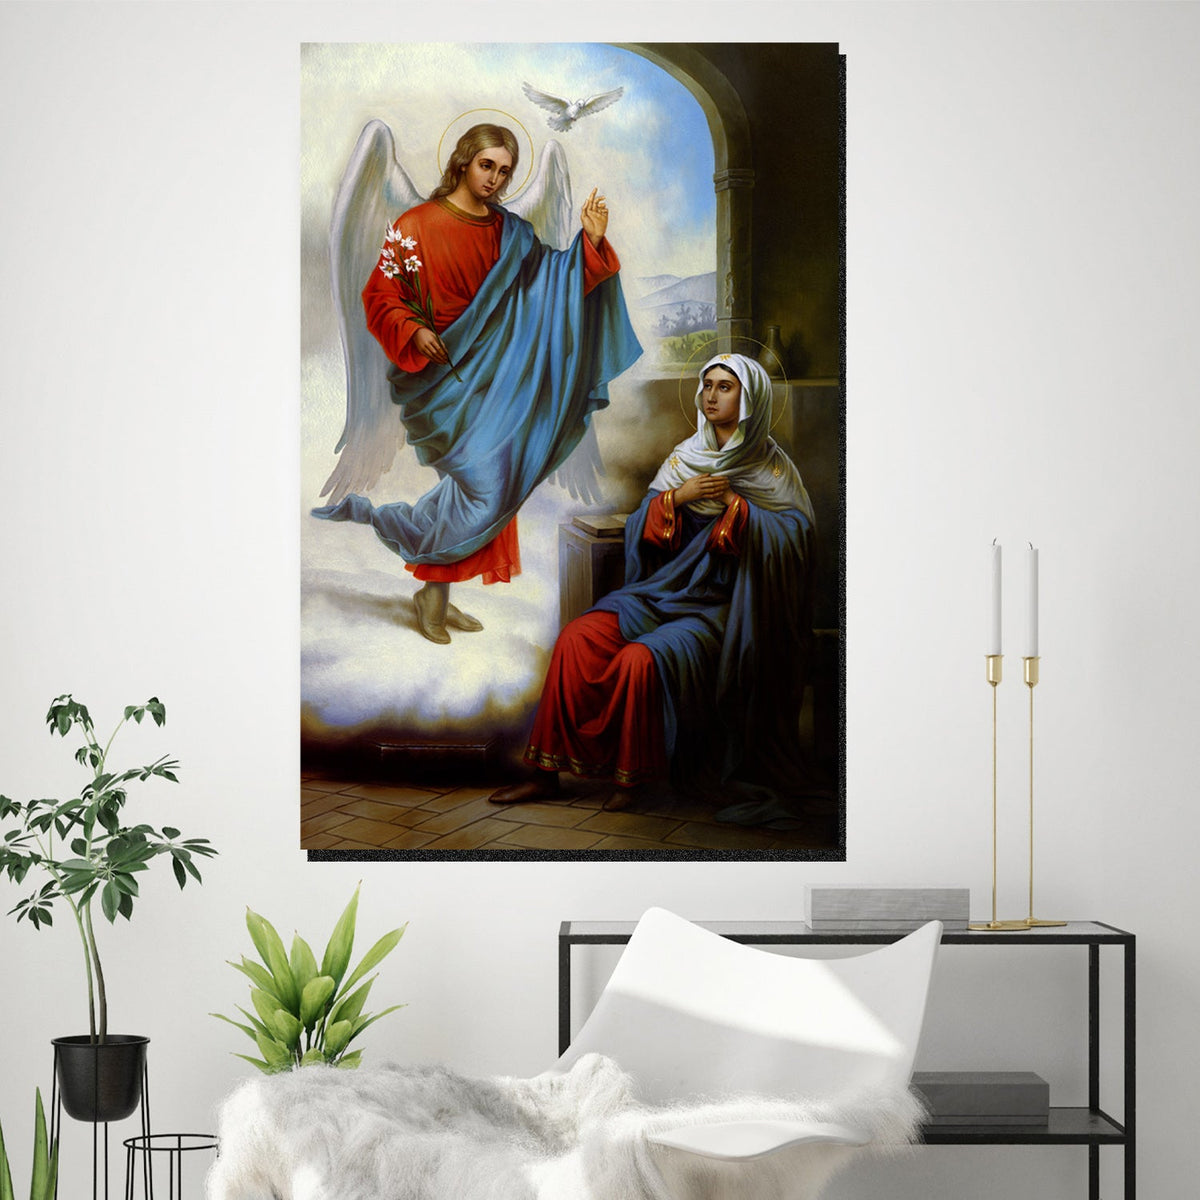 https://cdn.shopify.com/s/files/1/0387/9986/8044/products/TheAnnunciationoftheBlessedMaryCanvasArtprintStretched-4.jpg